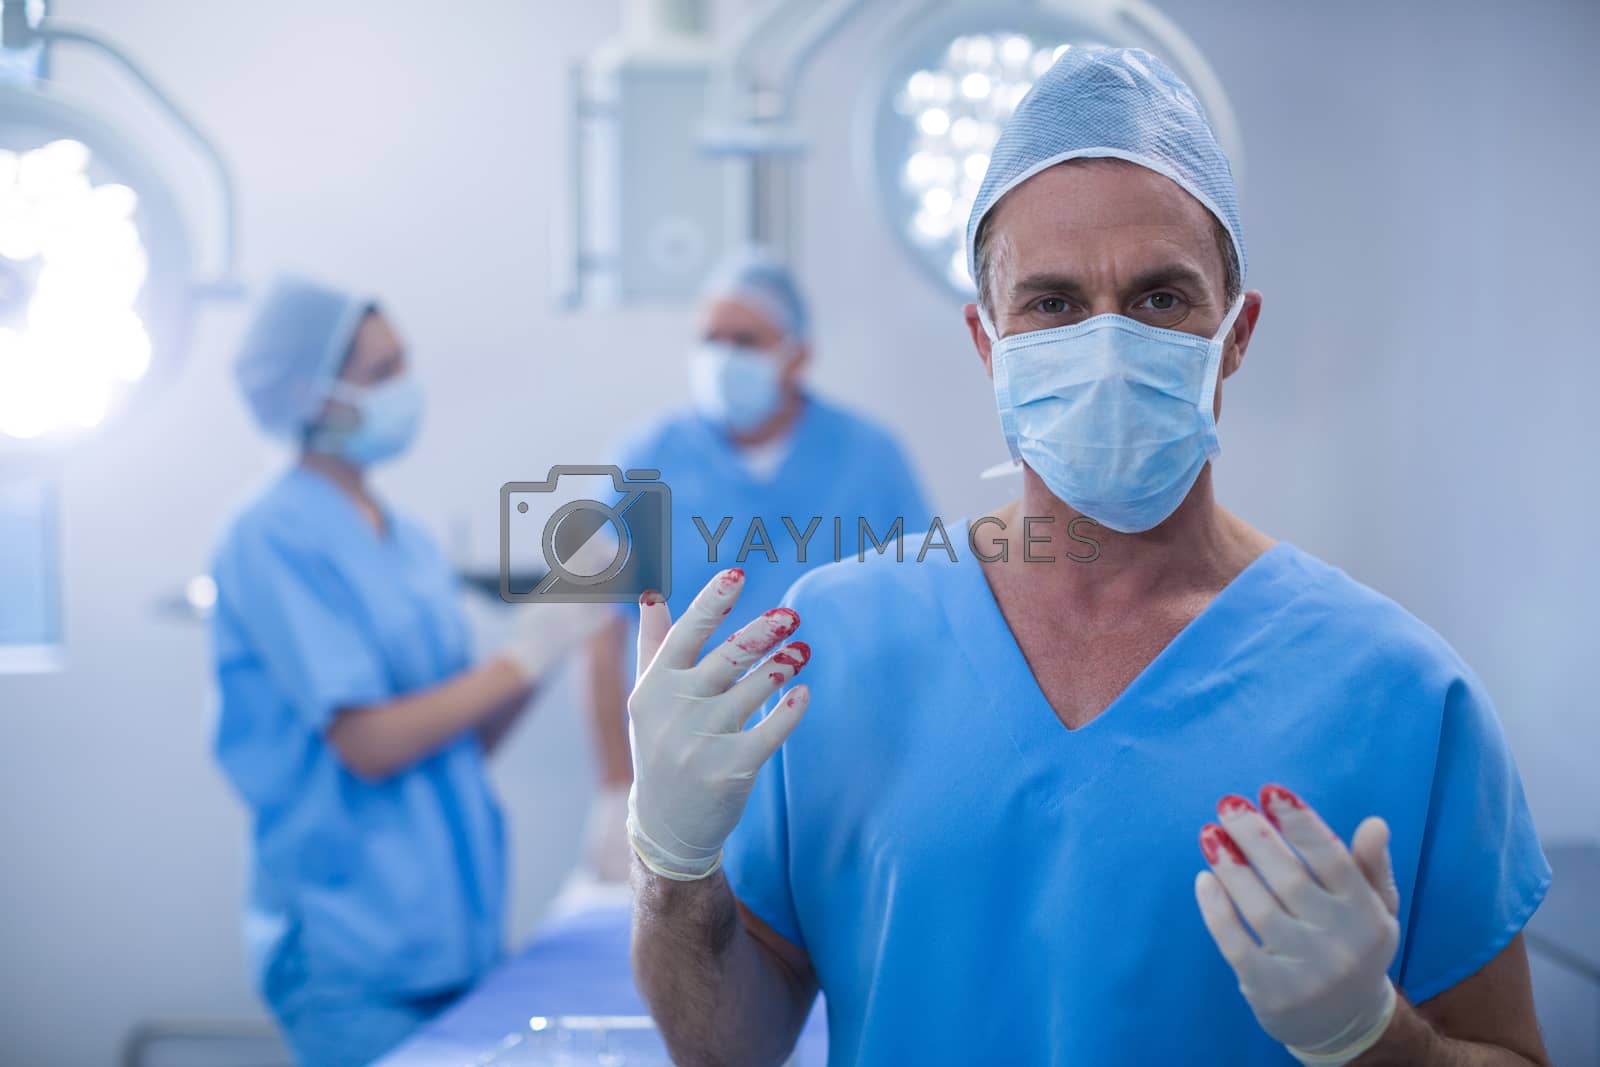 Royalty free image of Portrait of surgeon with blood on surgical glove in operation room by Wavebreakmedia